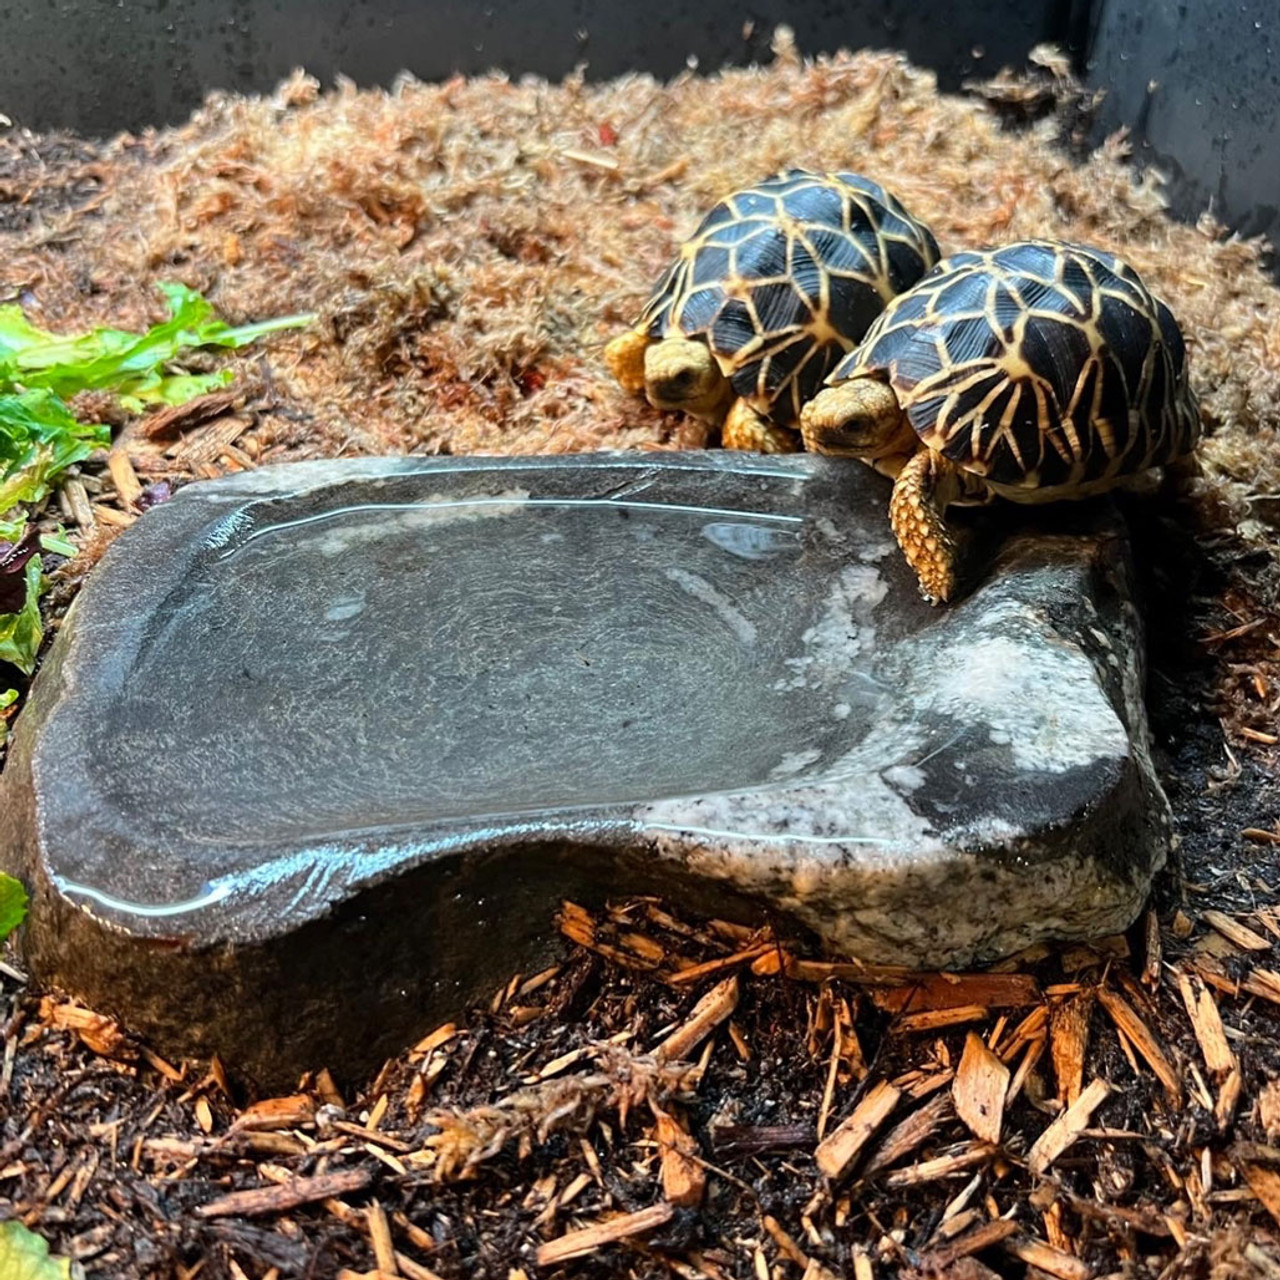 https://cdn11.bigcommerce.com/s-moq2ifbfzo/images/stencil/1280x1280/products/234/2103/Blus_Zoo_Rock_Water_Bowl_for_Barmoise_Tortoise__83069.1691808170.jpg?c=1?imbypass=on